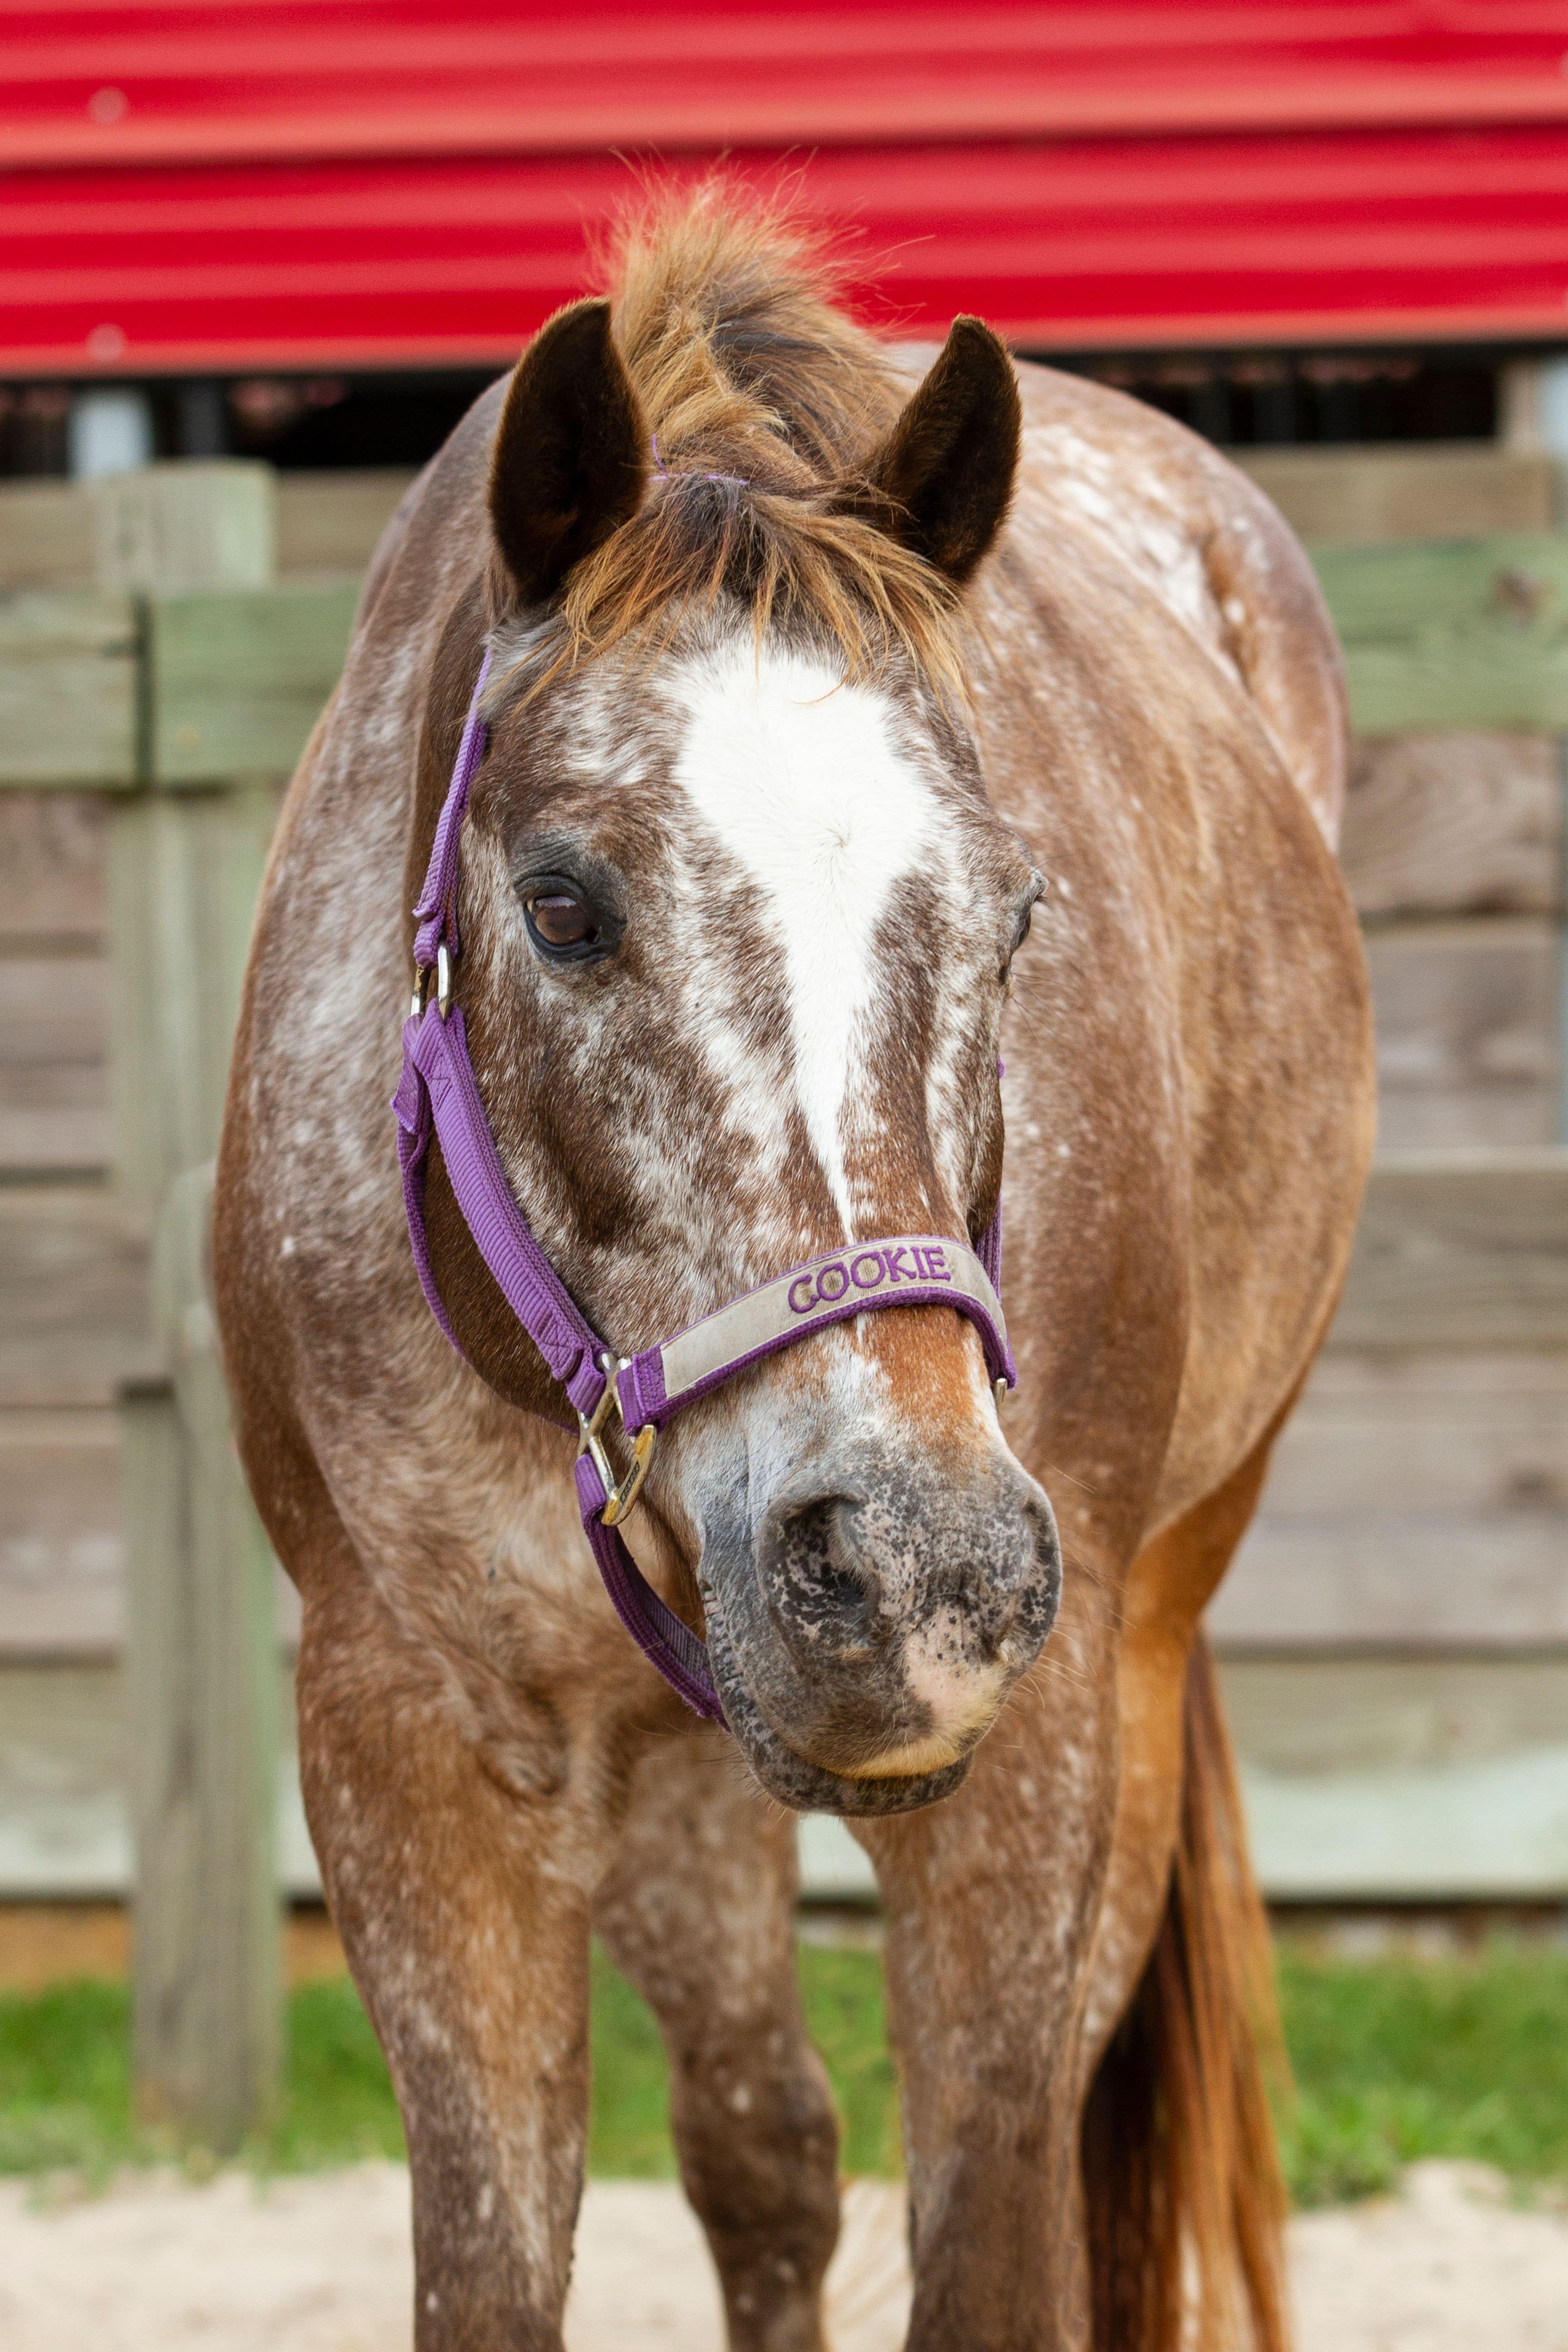 Cookie is an English lesson pony at J & S Performance Horses. She is a brown and white pony with a star, wearing a purple and gray halter with her name on it.